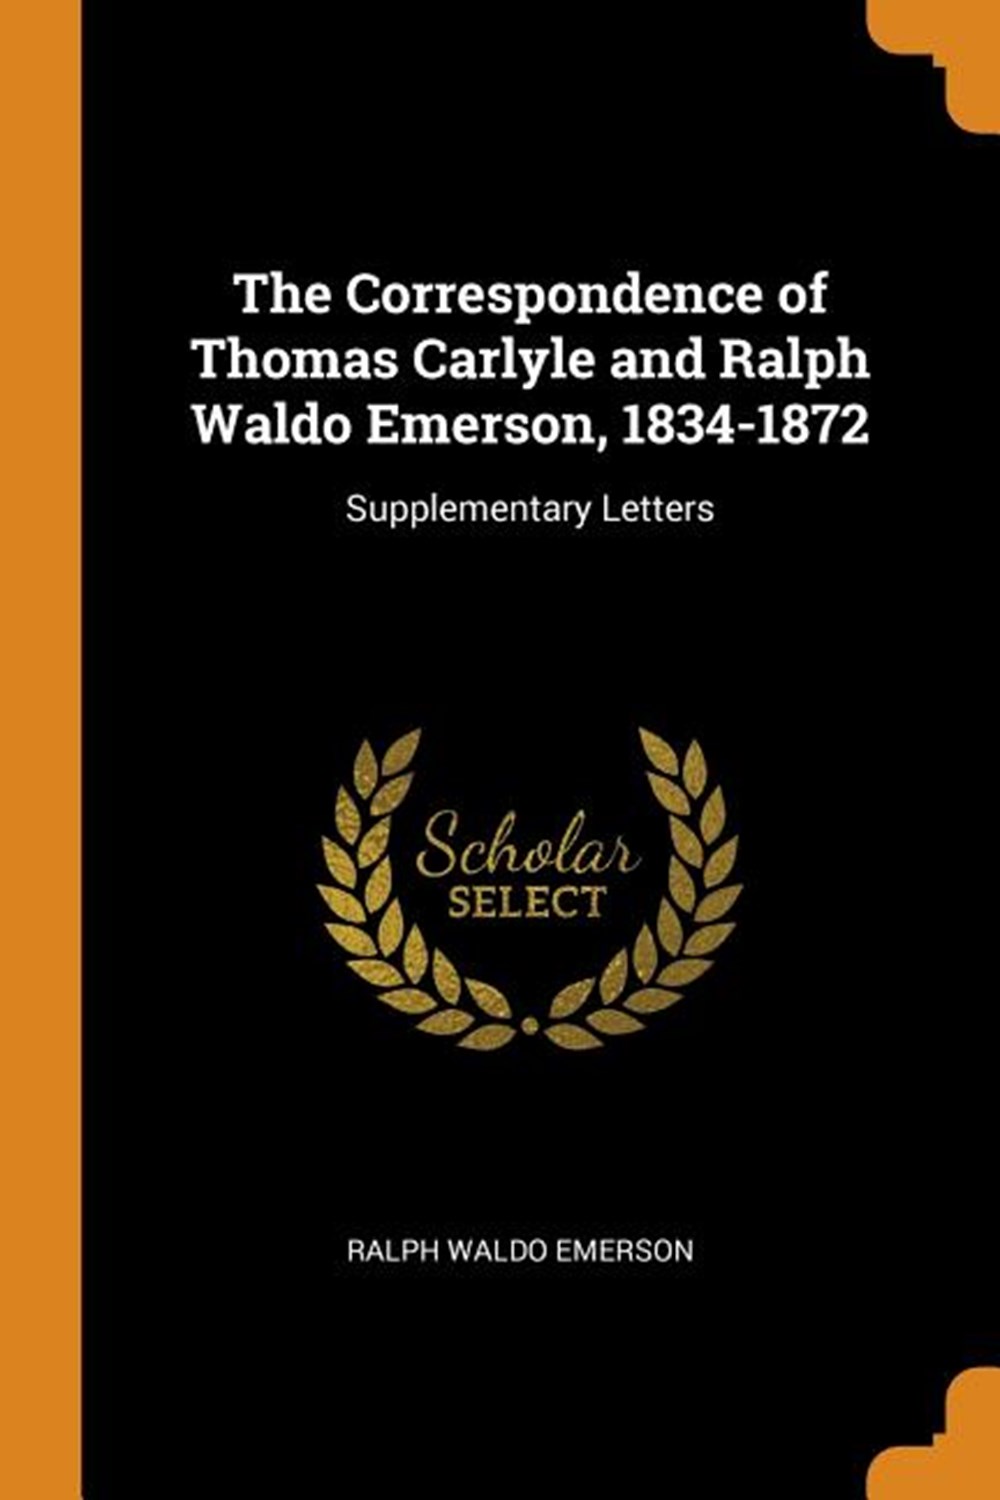 Correspondence of Thomas Carlyle and Ralph Waldo Emerson, 1834-1872 Supplementary Letters